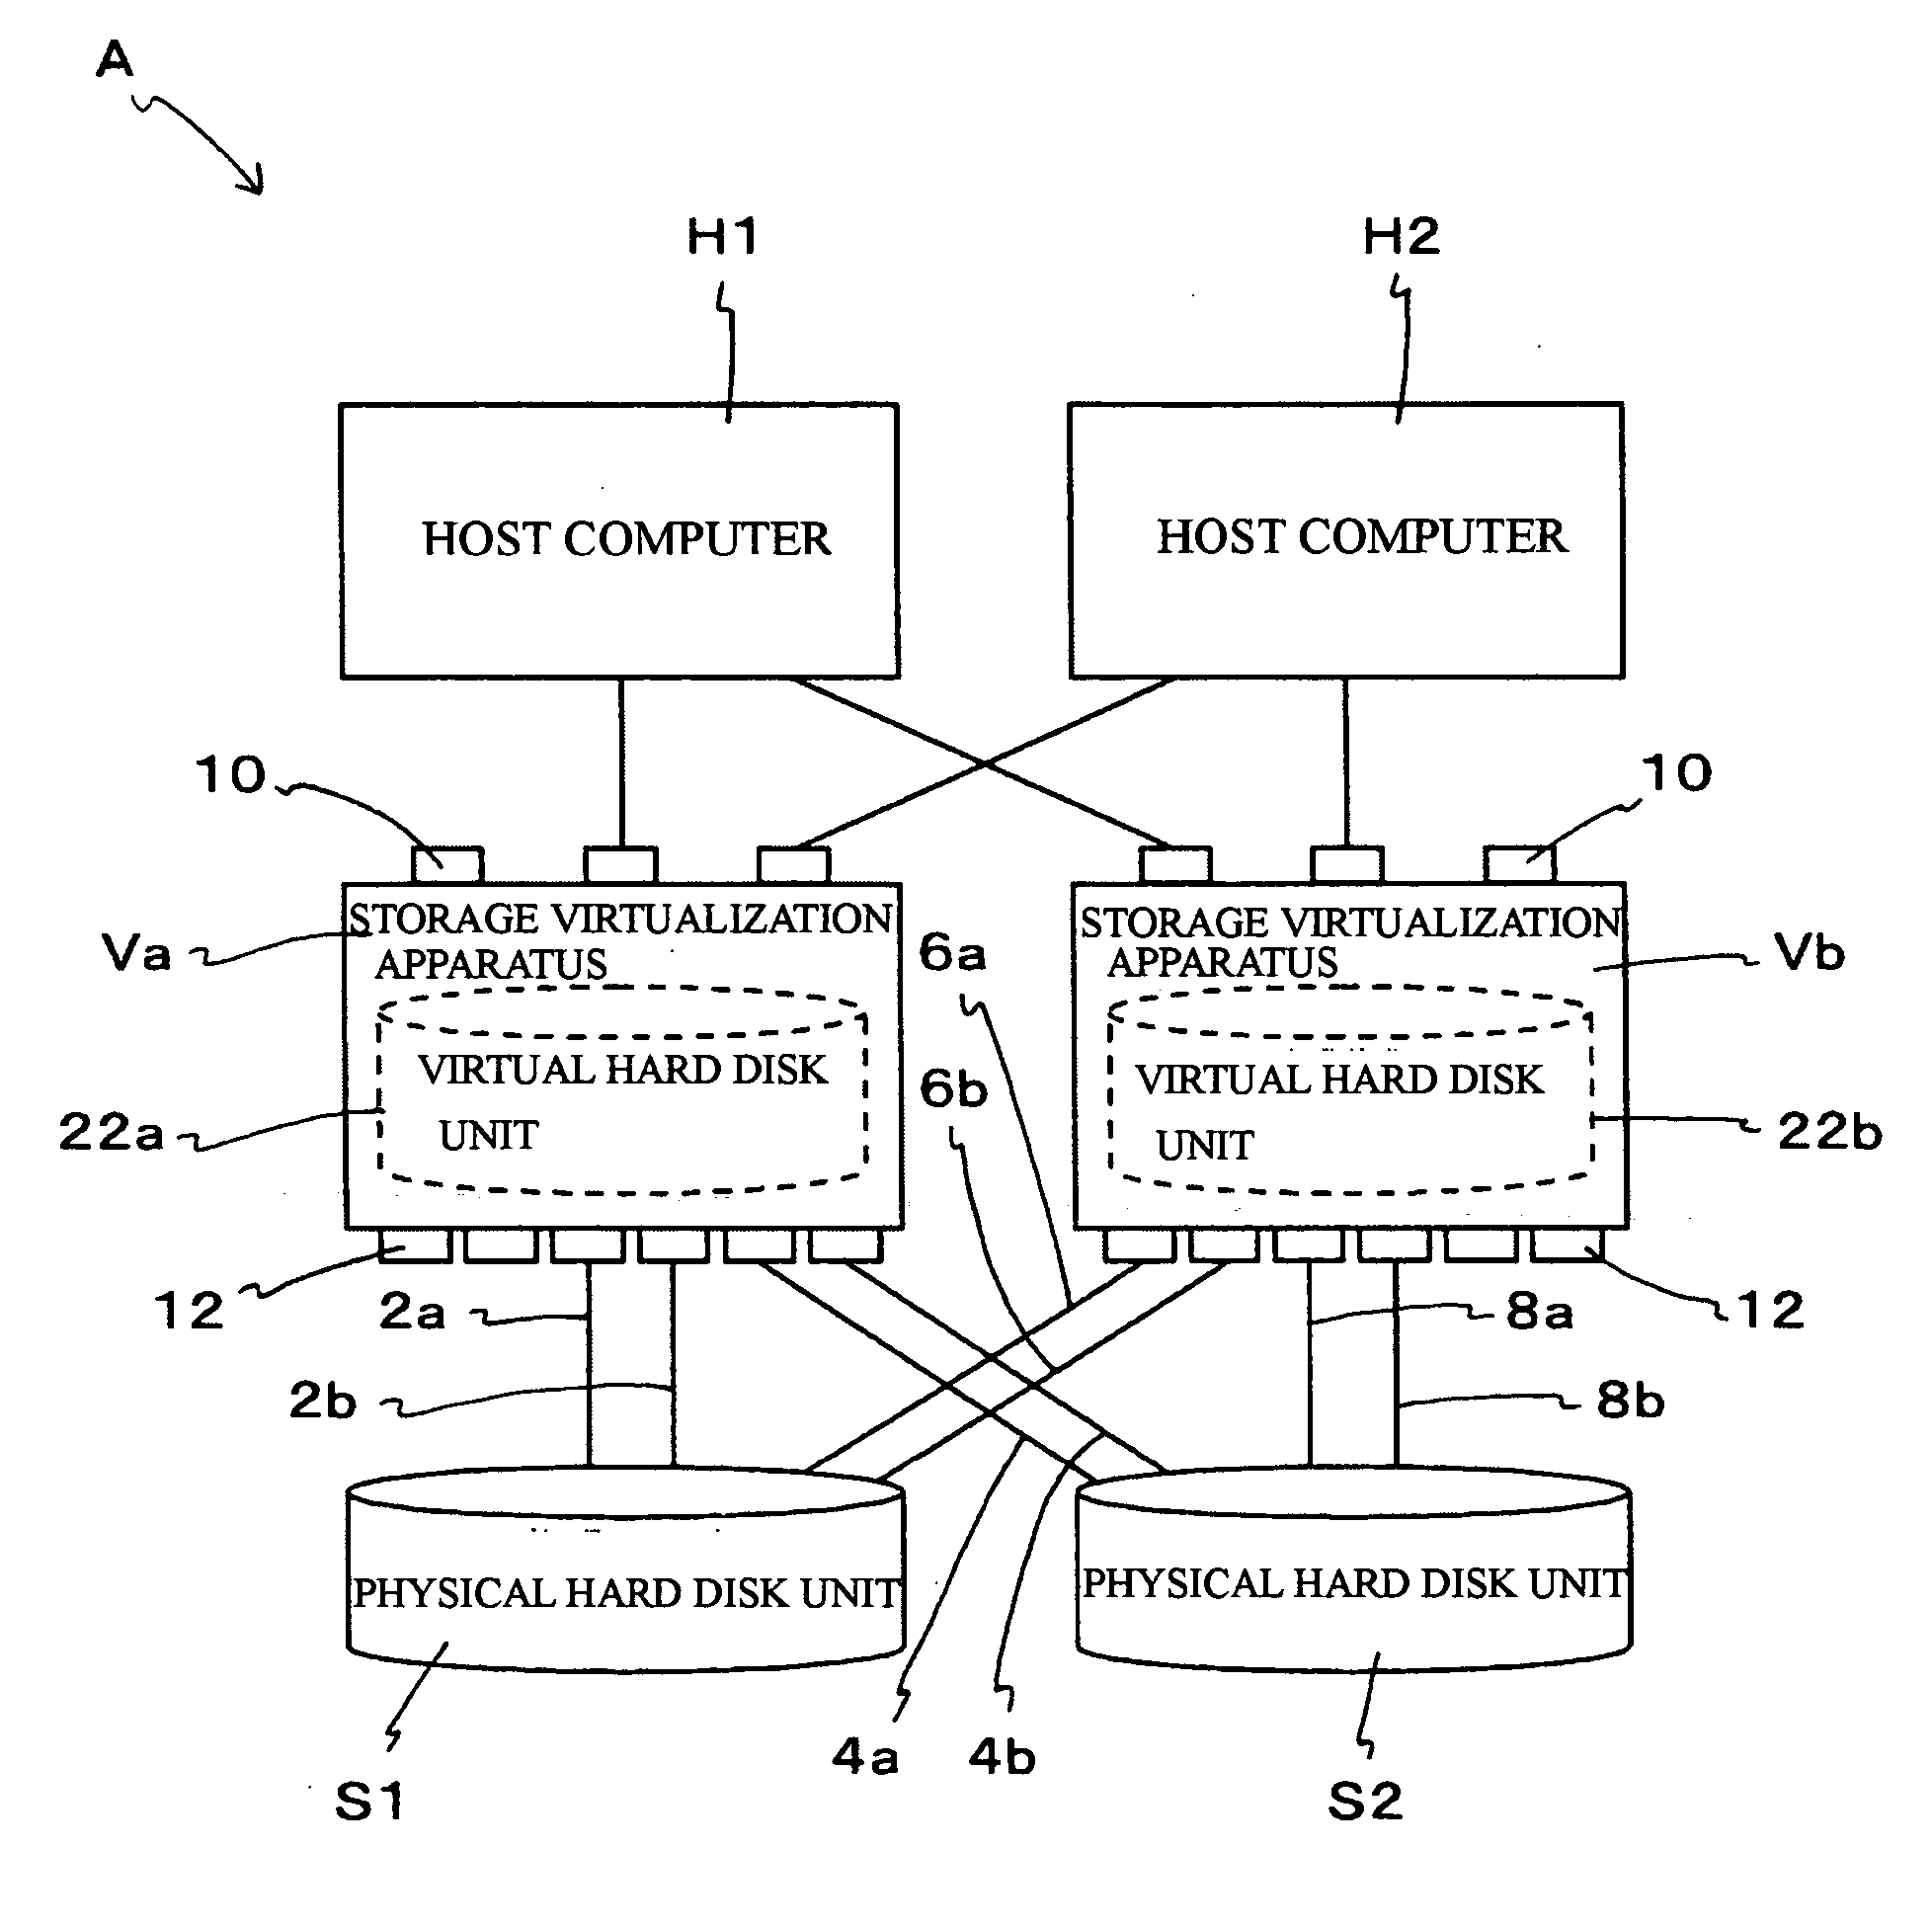 Storage virtualization apparatus and computer system using the same